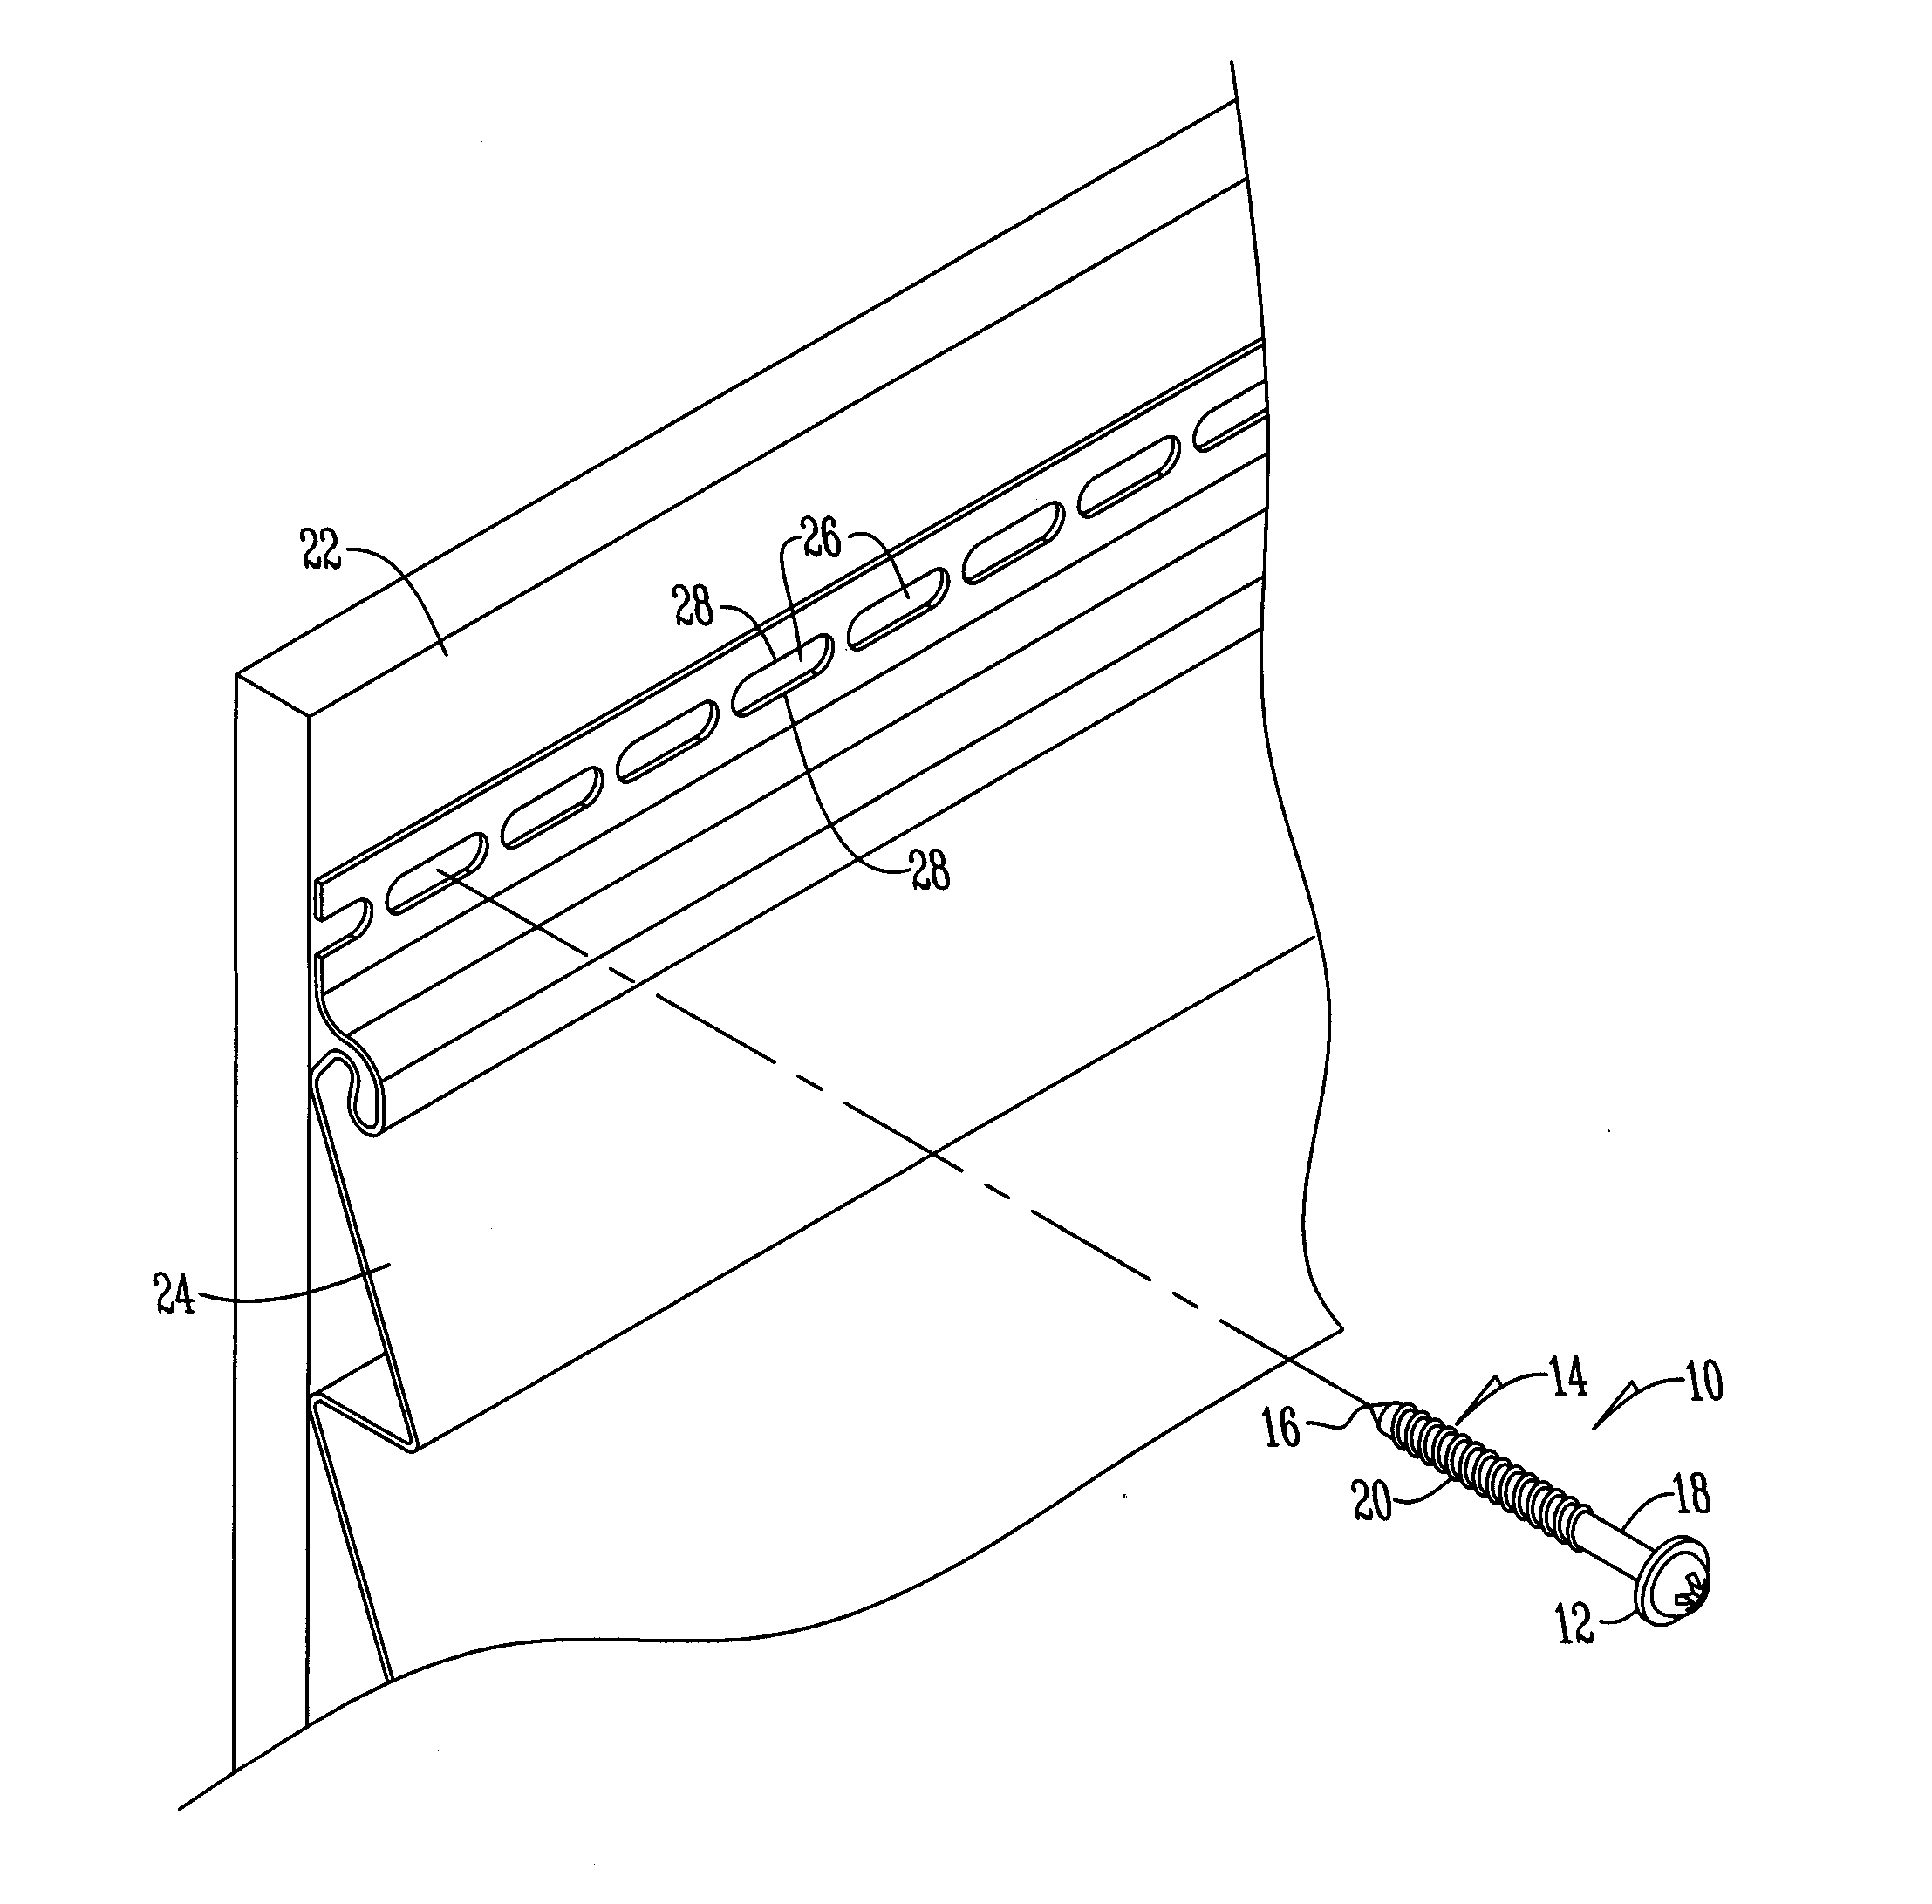 Apparatus for securing siding